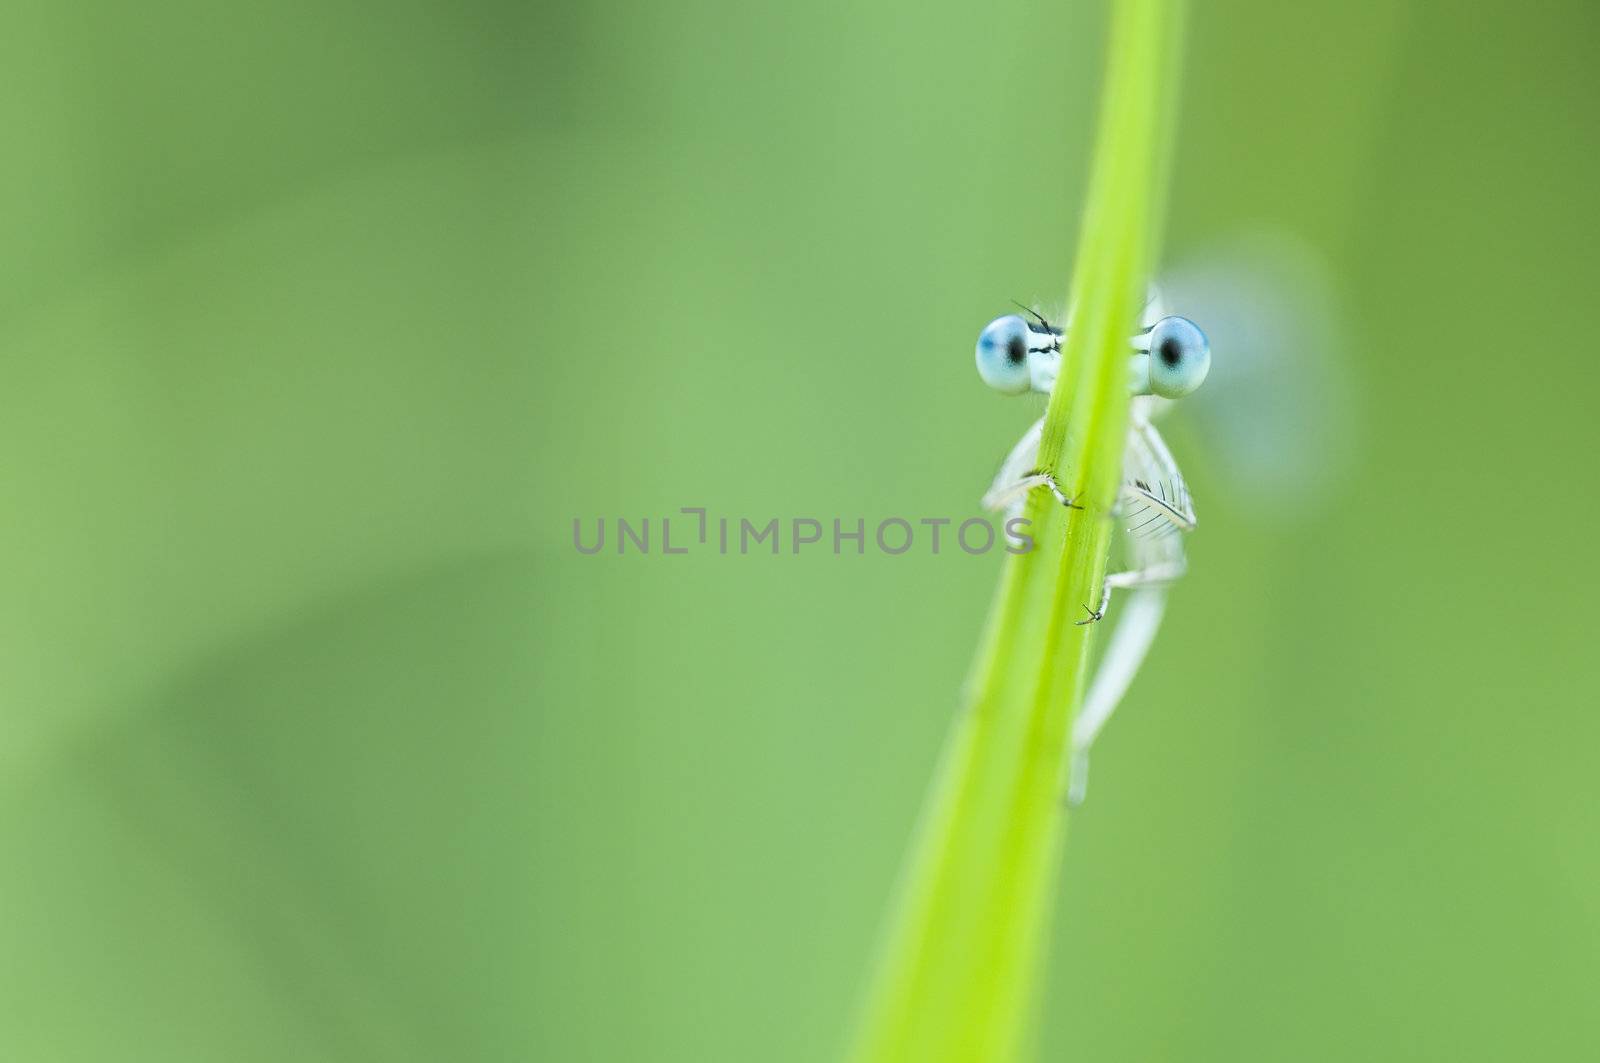 Blue damselfly hiding behind a blade of grass by AlessandroZocc